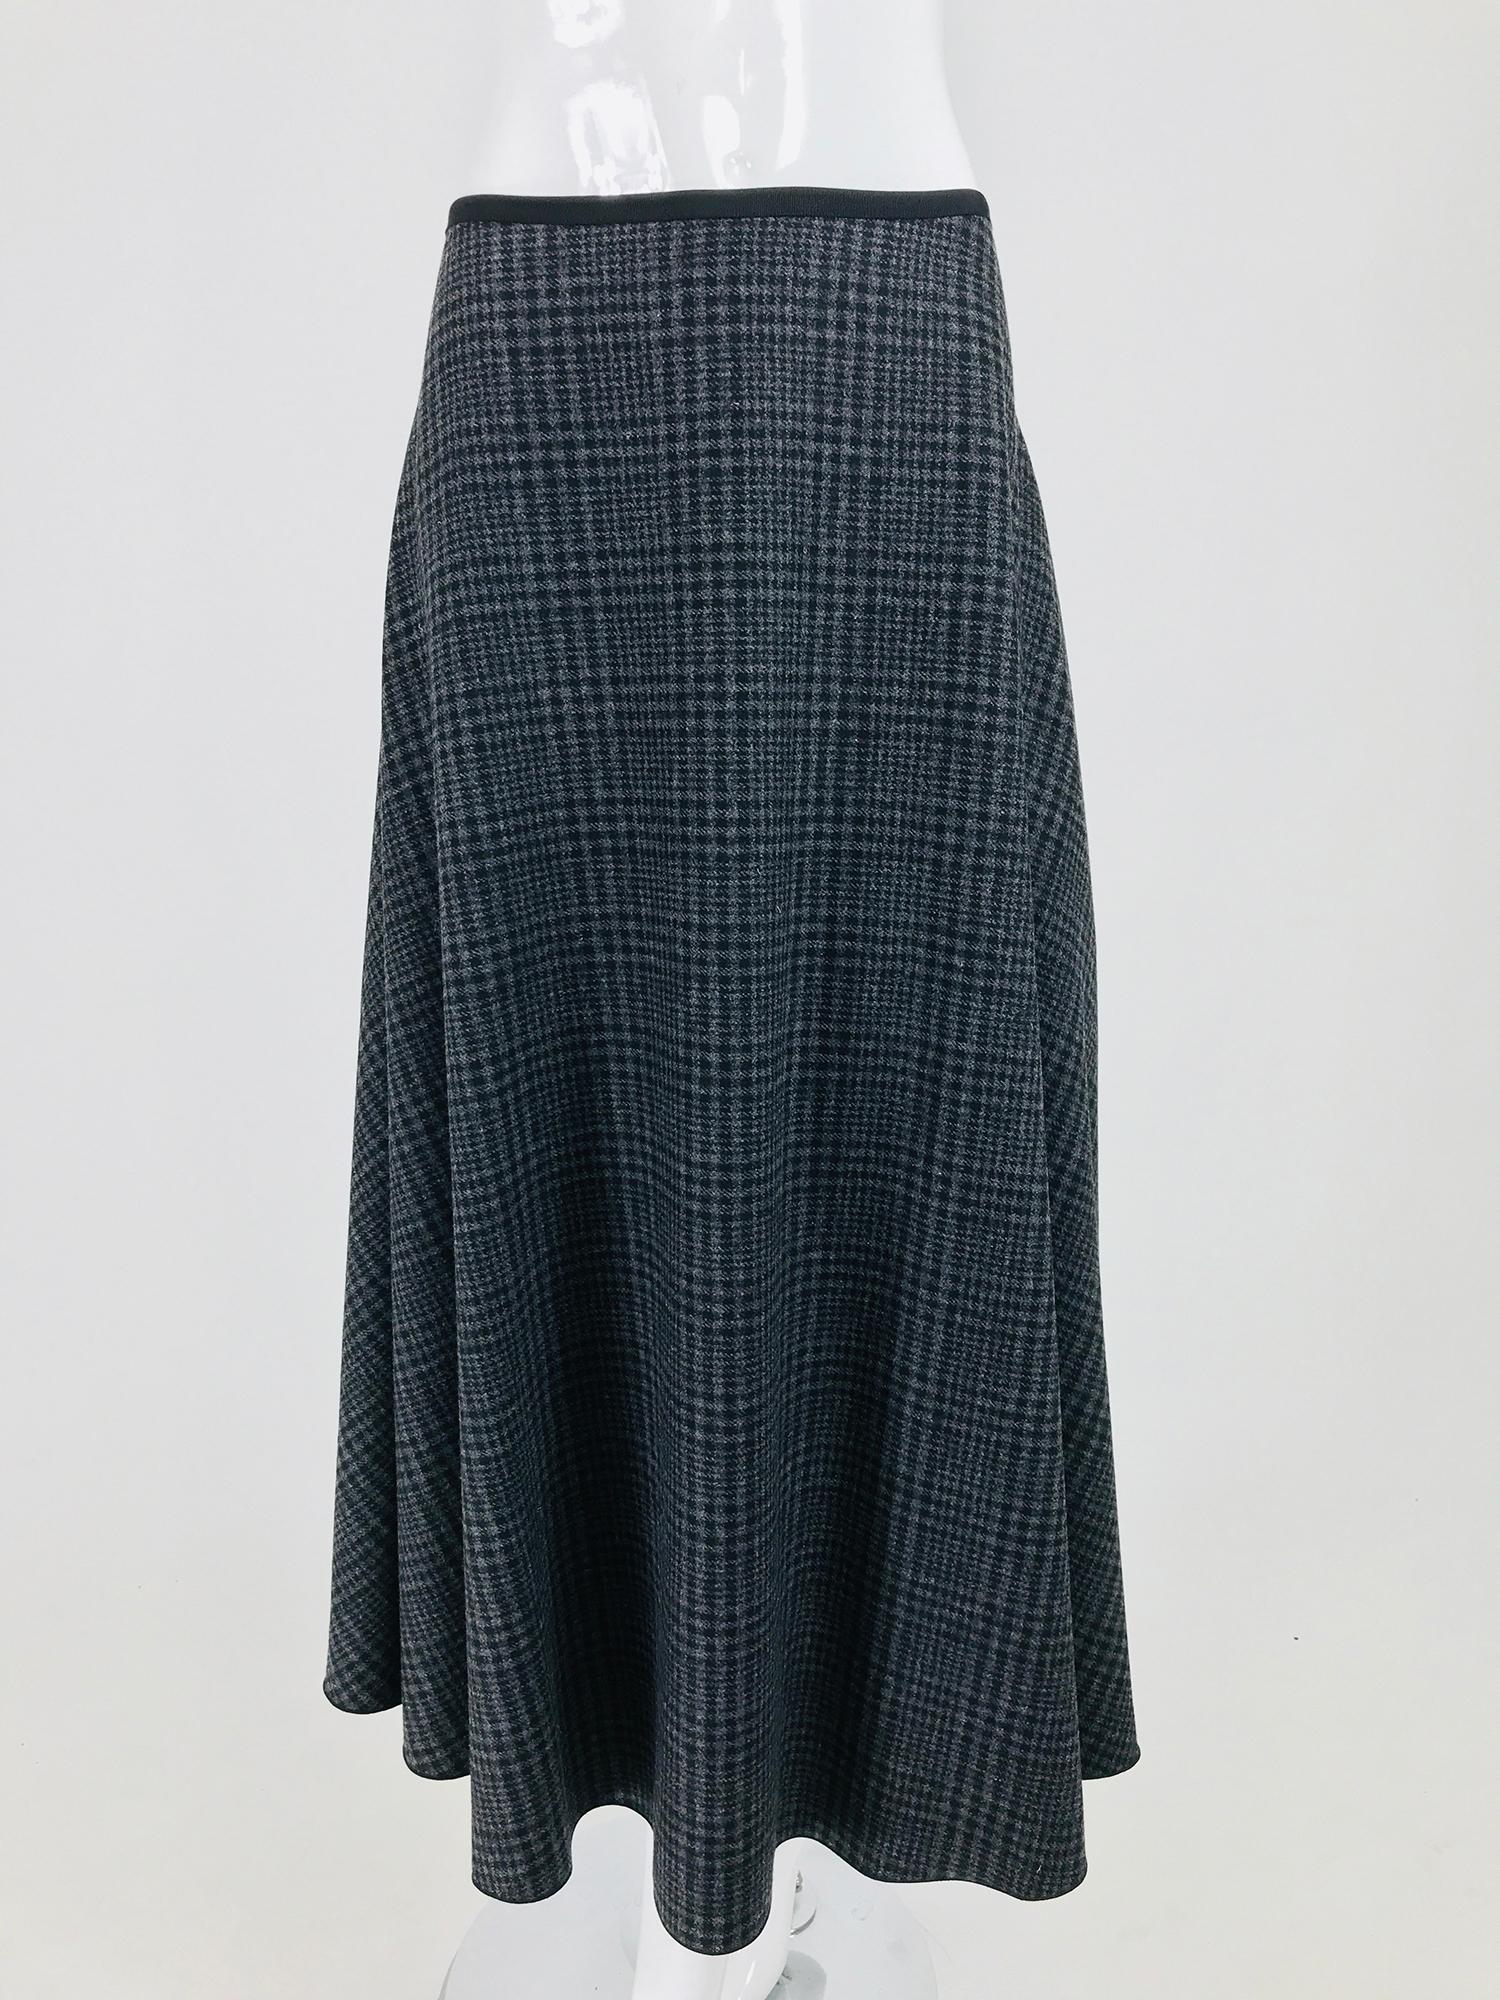 Lanvin Hive 2015 wool plaid bias cut skirt 42. Unlined wool skirt with on seam side pockets. Soft wool with nice drape. Narrow black grosgrain ribbon waist band, closes at the side with a zipper and hook and eye. 
In excellent wearable condition.